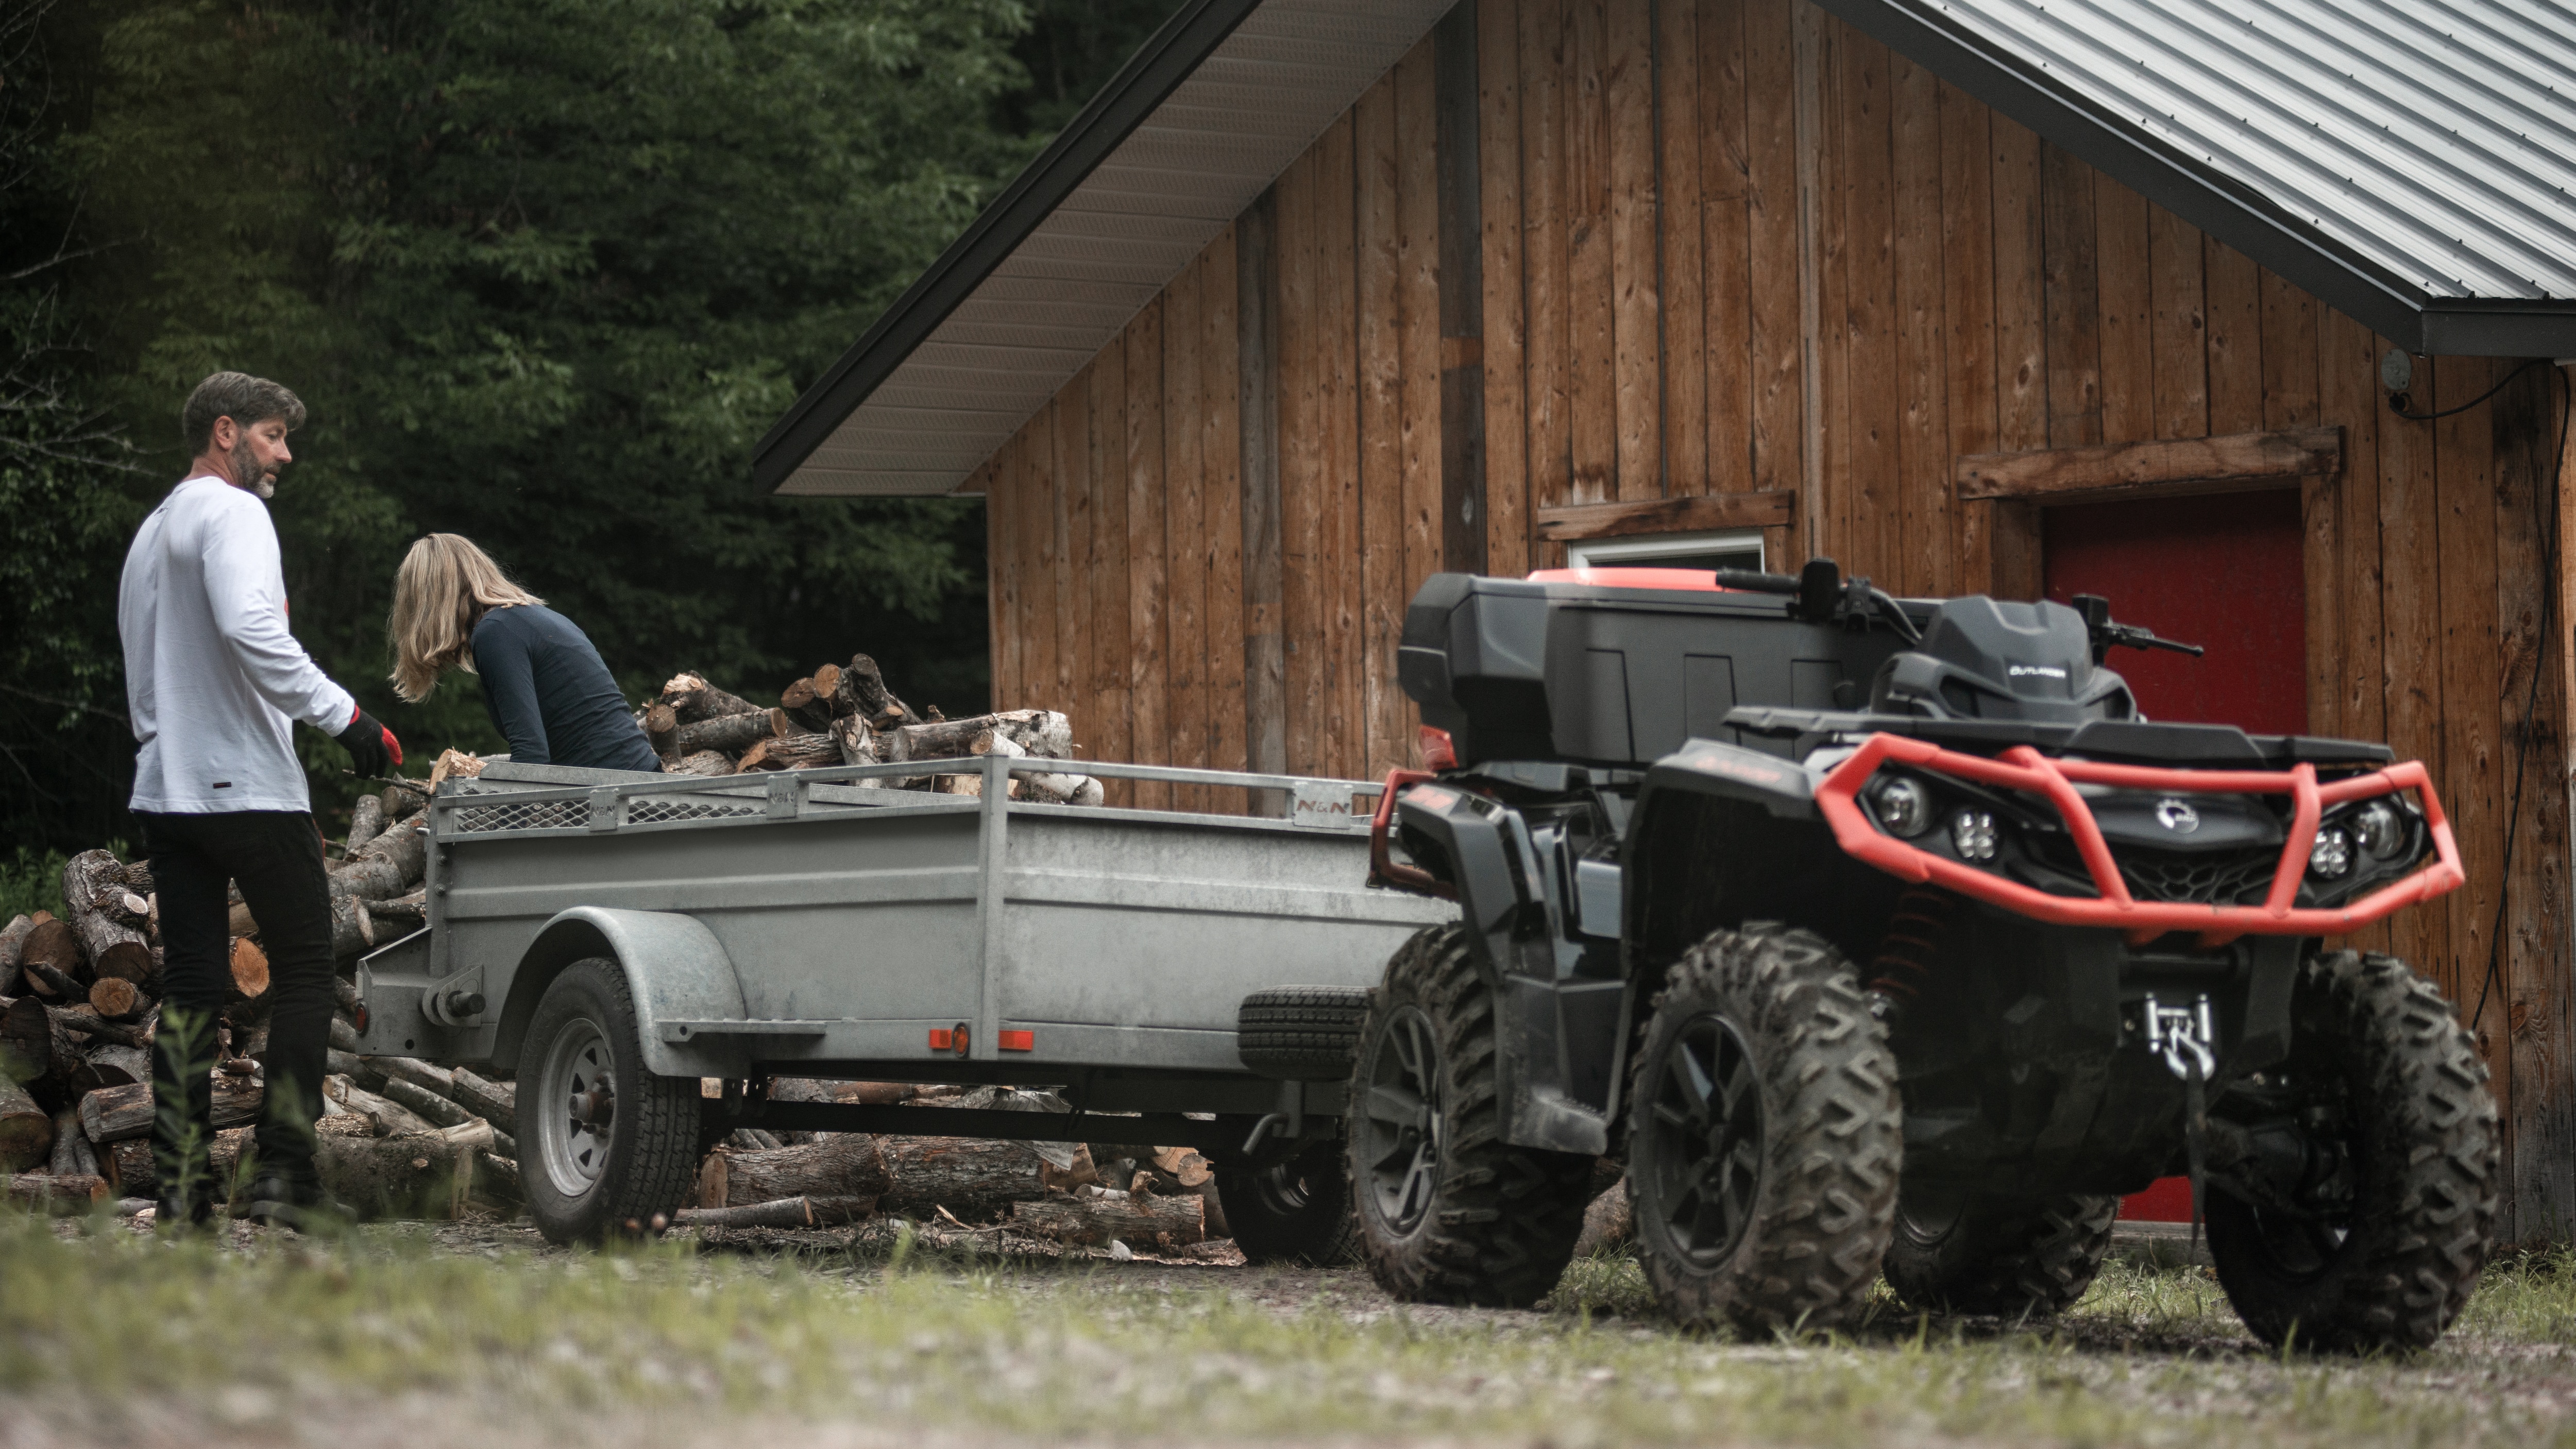 Two people putting wood in the trailer of a Can-Am Outlander XT ATV